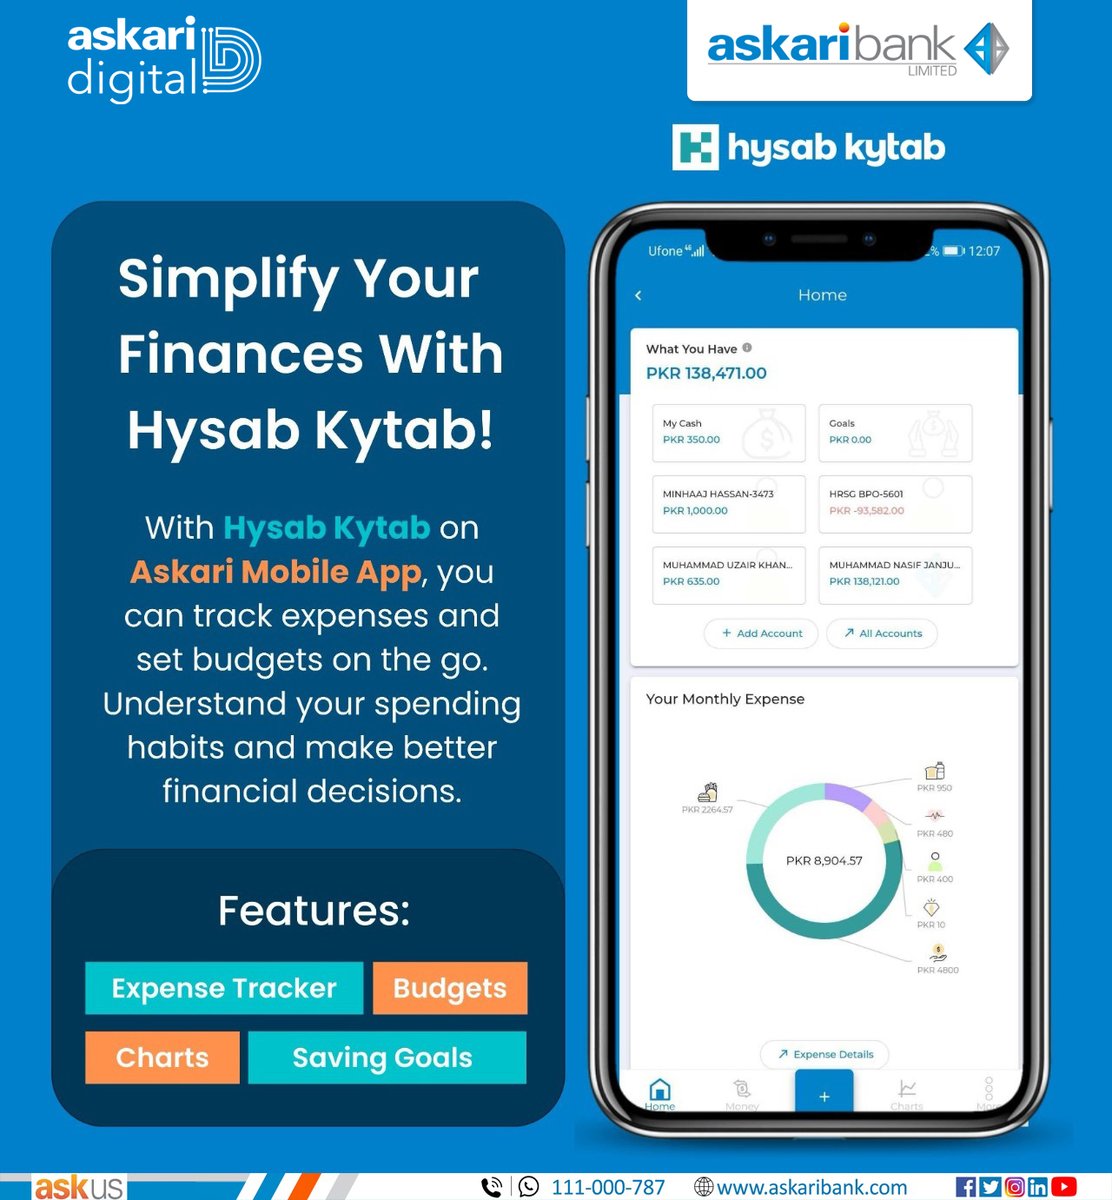 With Hysab Kytab on Askari Mobile App, you can track expenses and set budgets on the go.

For details visit: askaribank.com/services/alter…

#AskariBank #AskariDigital #MobileApp #Features #HysabKytab #Finance #Expense #Budget